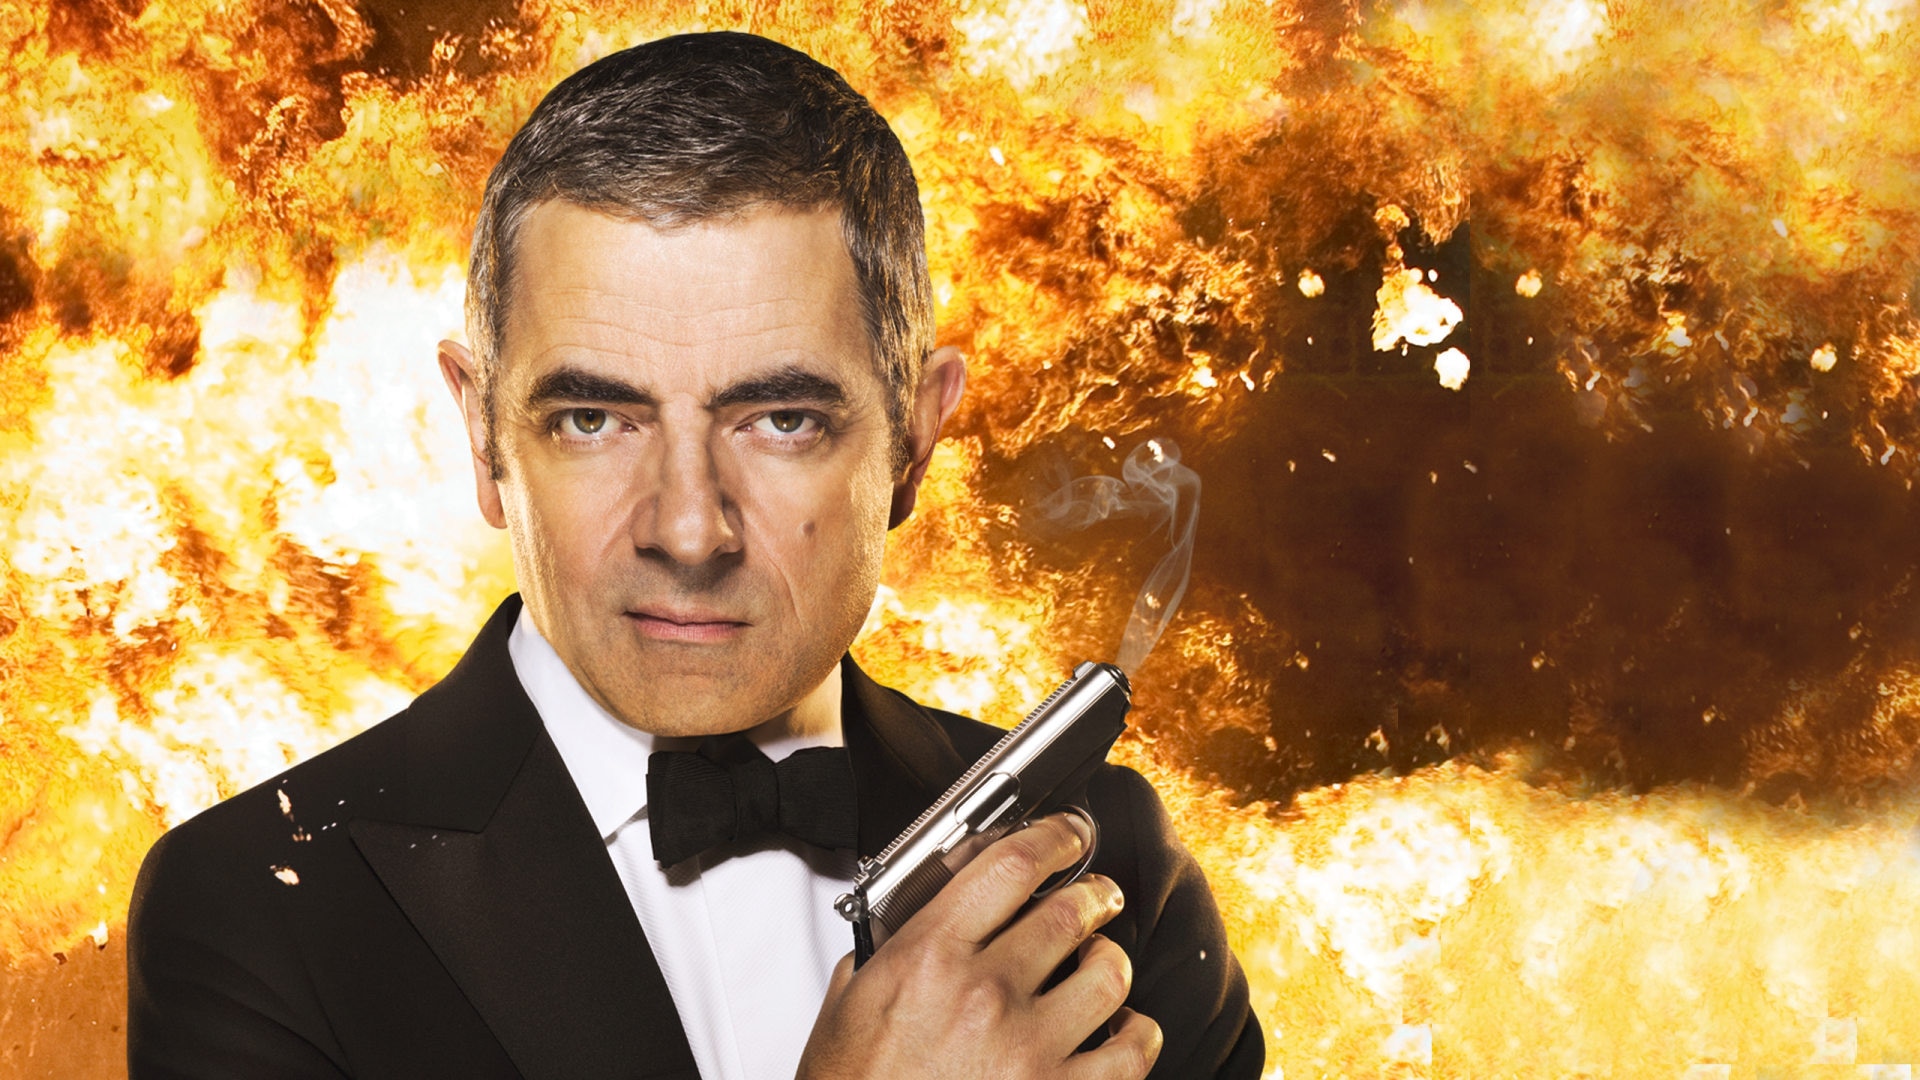 Johnny English Strikes Again 2018 Poster Wallpapers